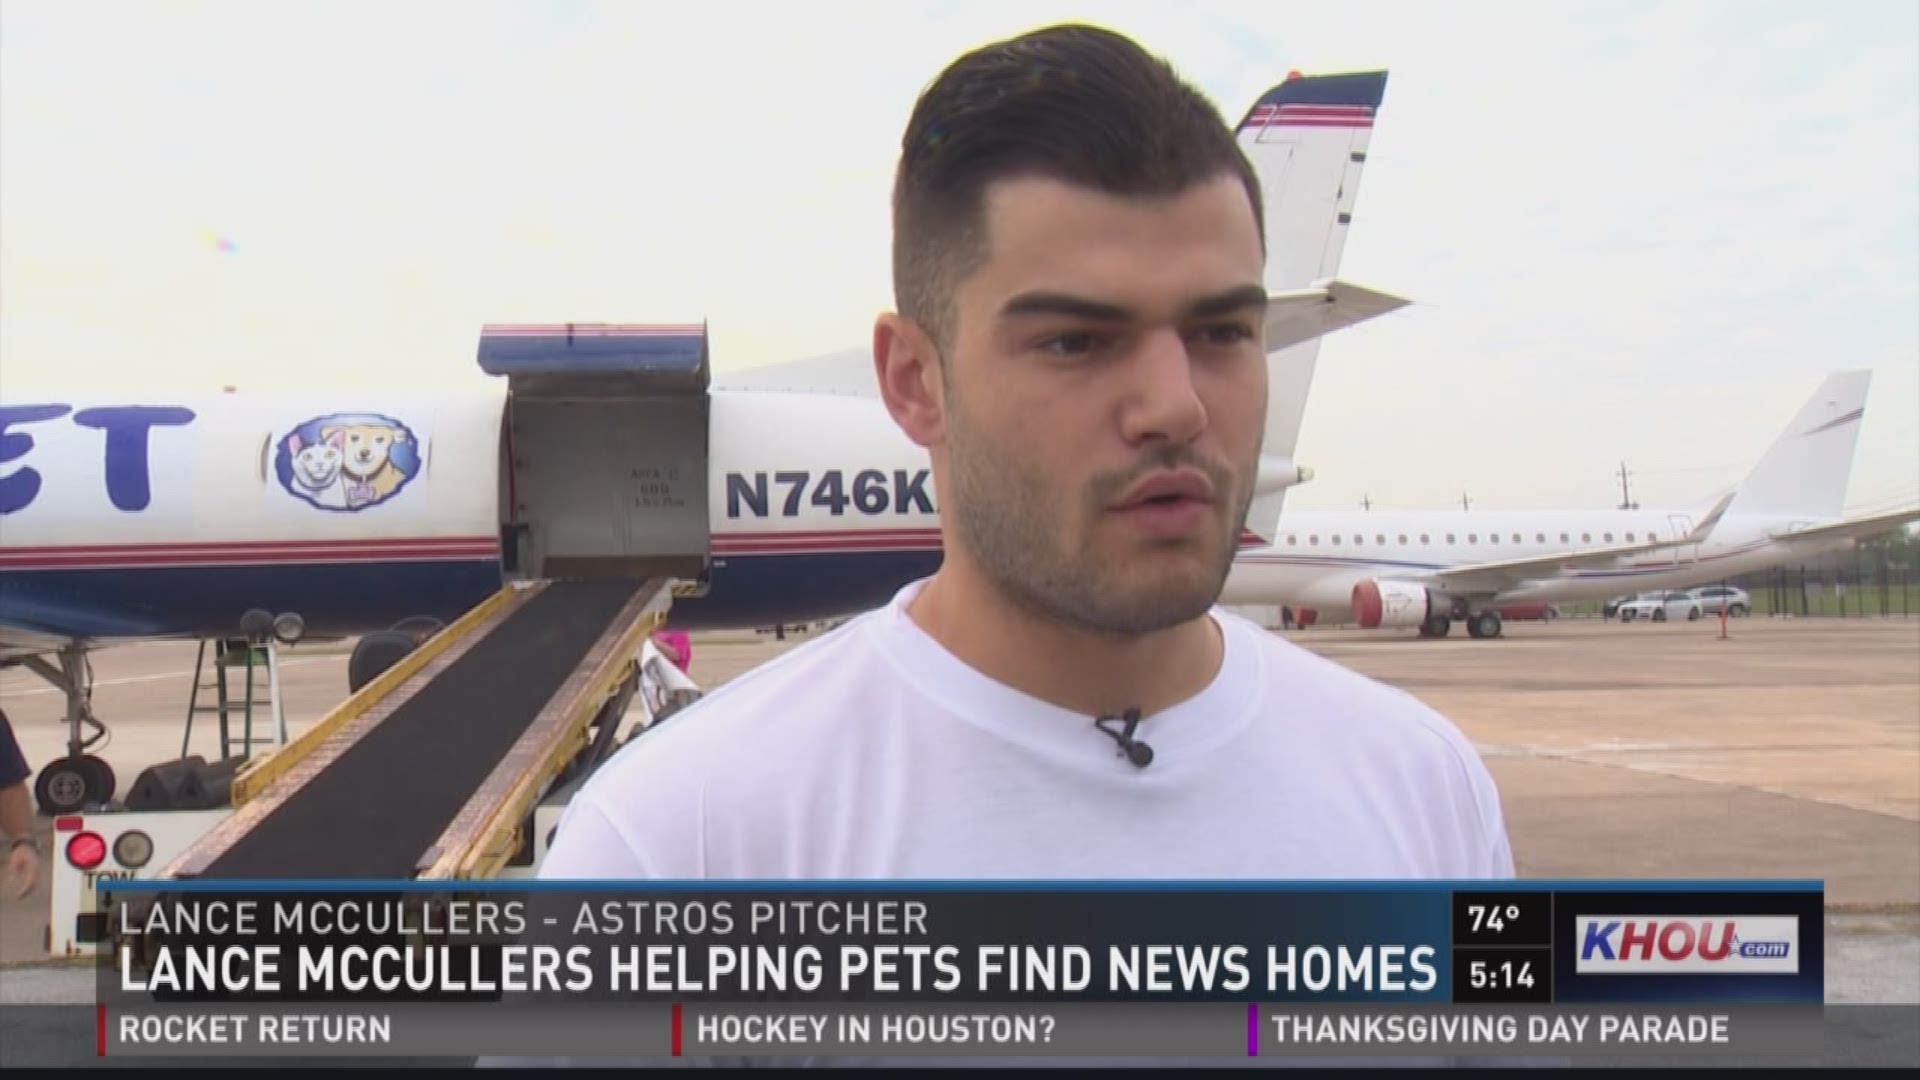 Astros pitcher Lance McCullers was on hand Thursday when pets left homeless by Hurricane Harvey were flown to their new homes in Los Angeles. McCullers' foundation donated money to the organizations working to help the animals.